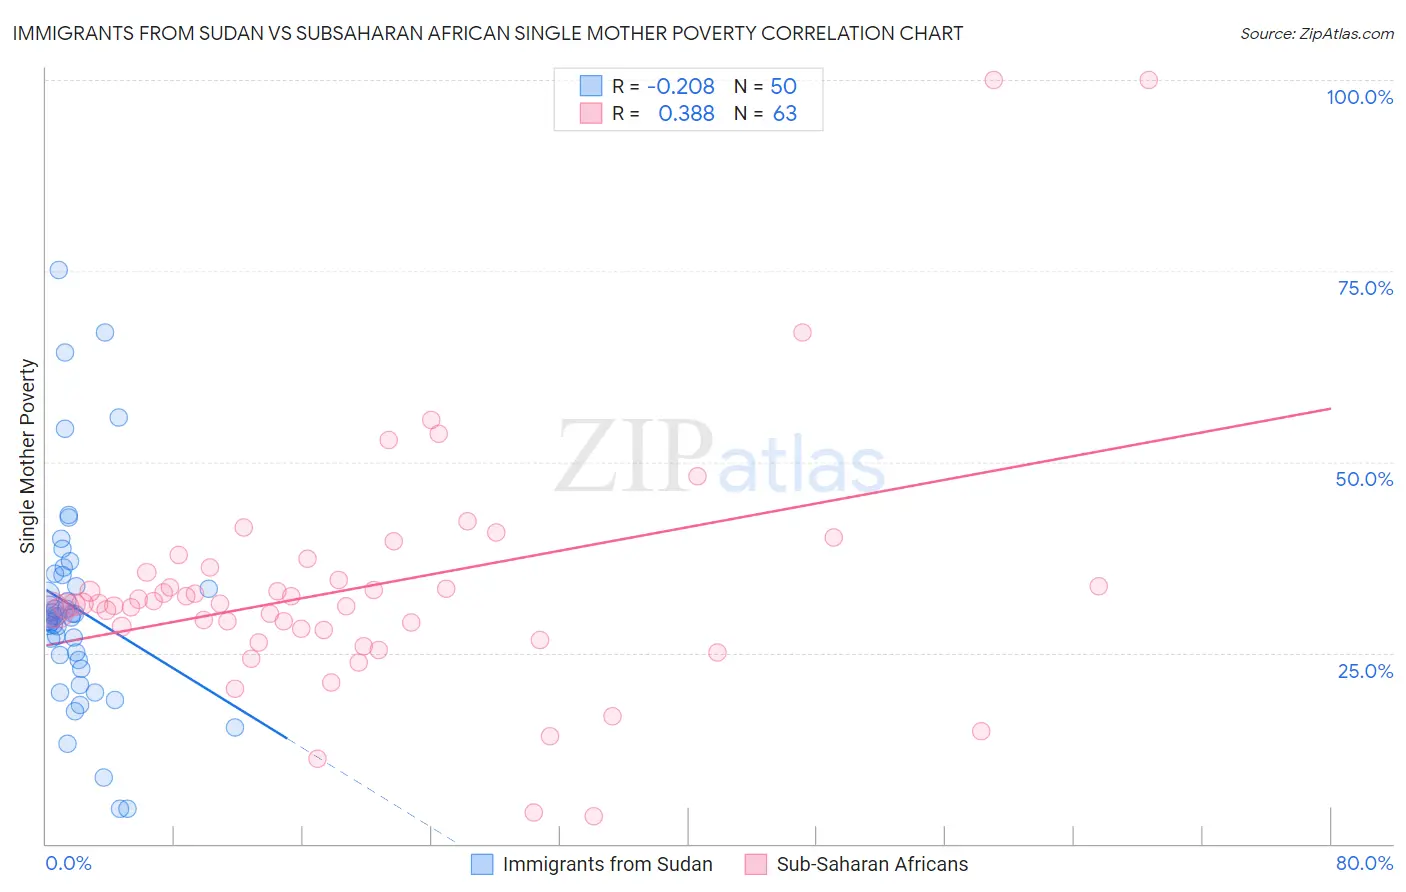 Immigrants from Sudan vs Subsaharan African Single Mother Poverty